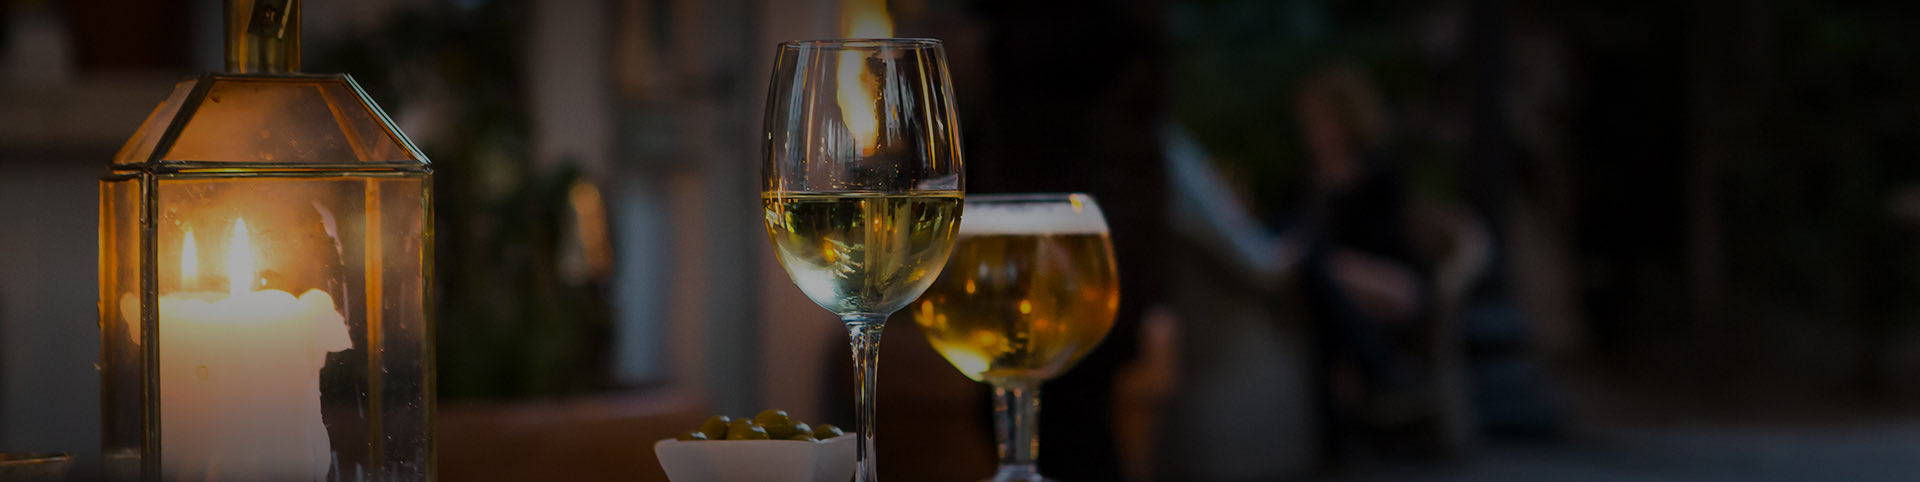 a glass of white wine and a glass of beer